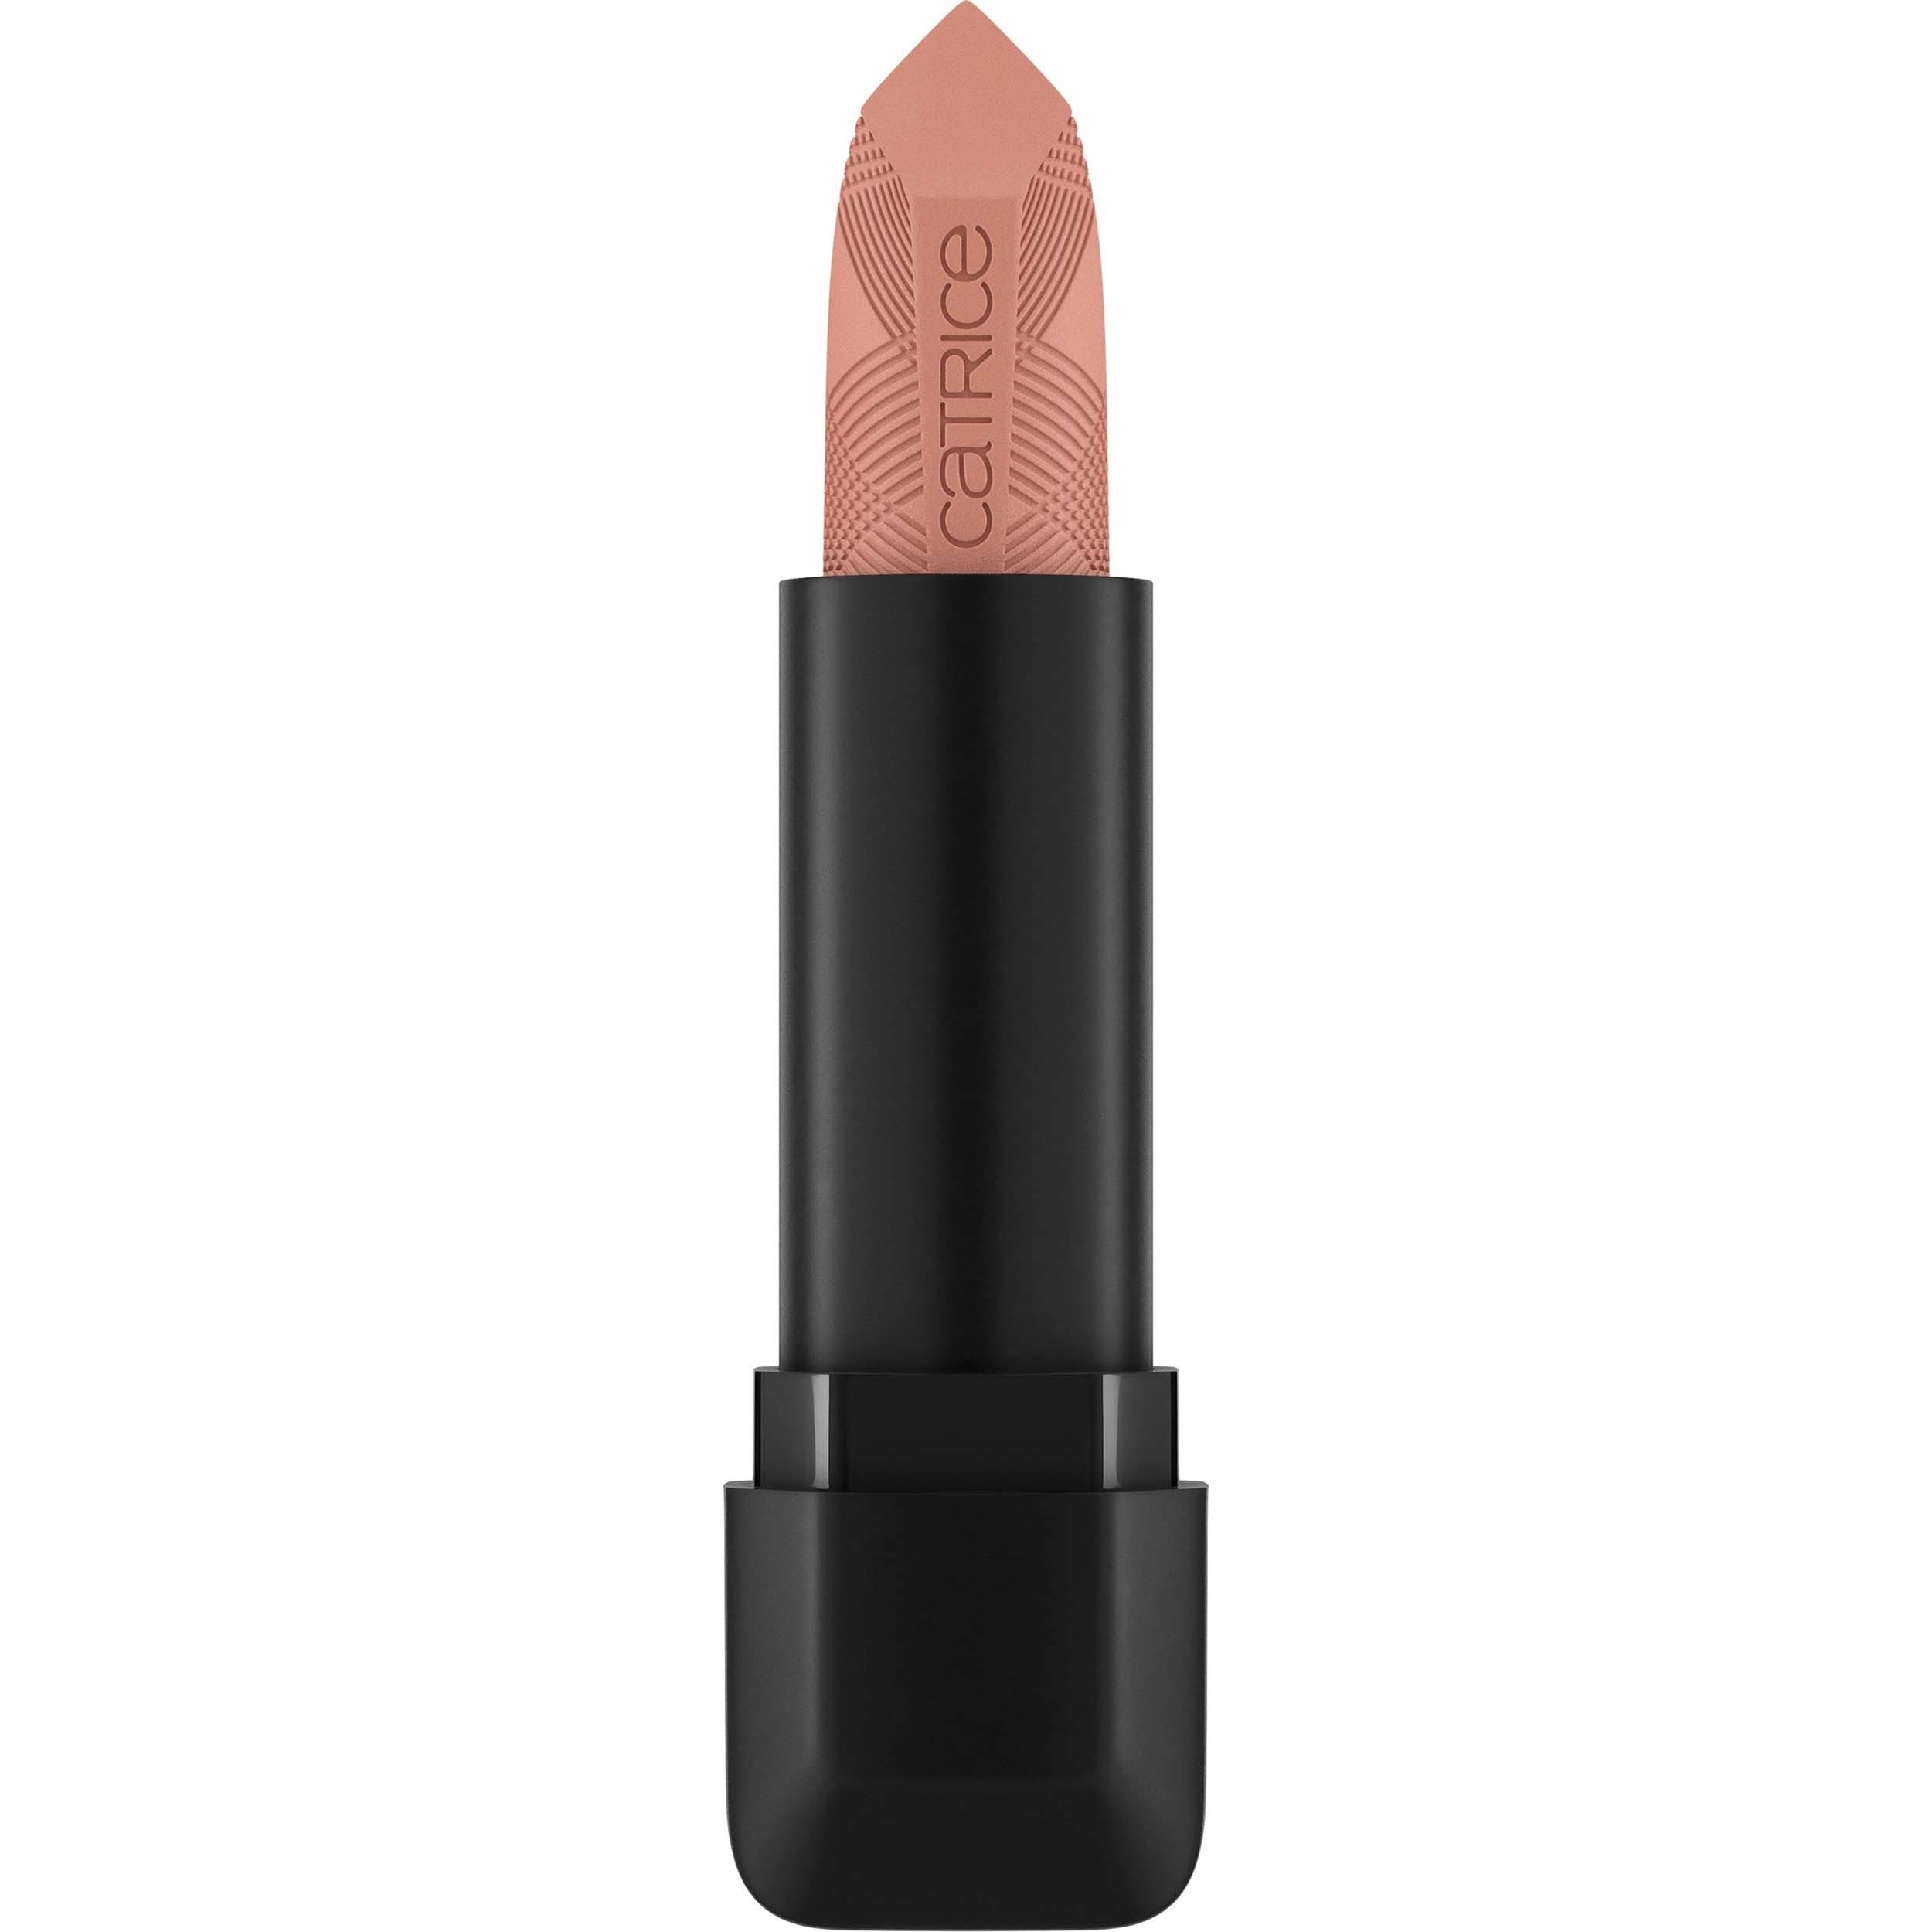 Catrice Scandalous Matte Lipstick 020 Nude Obsession 3.5g